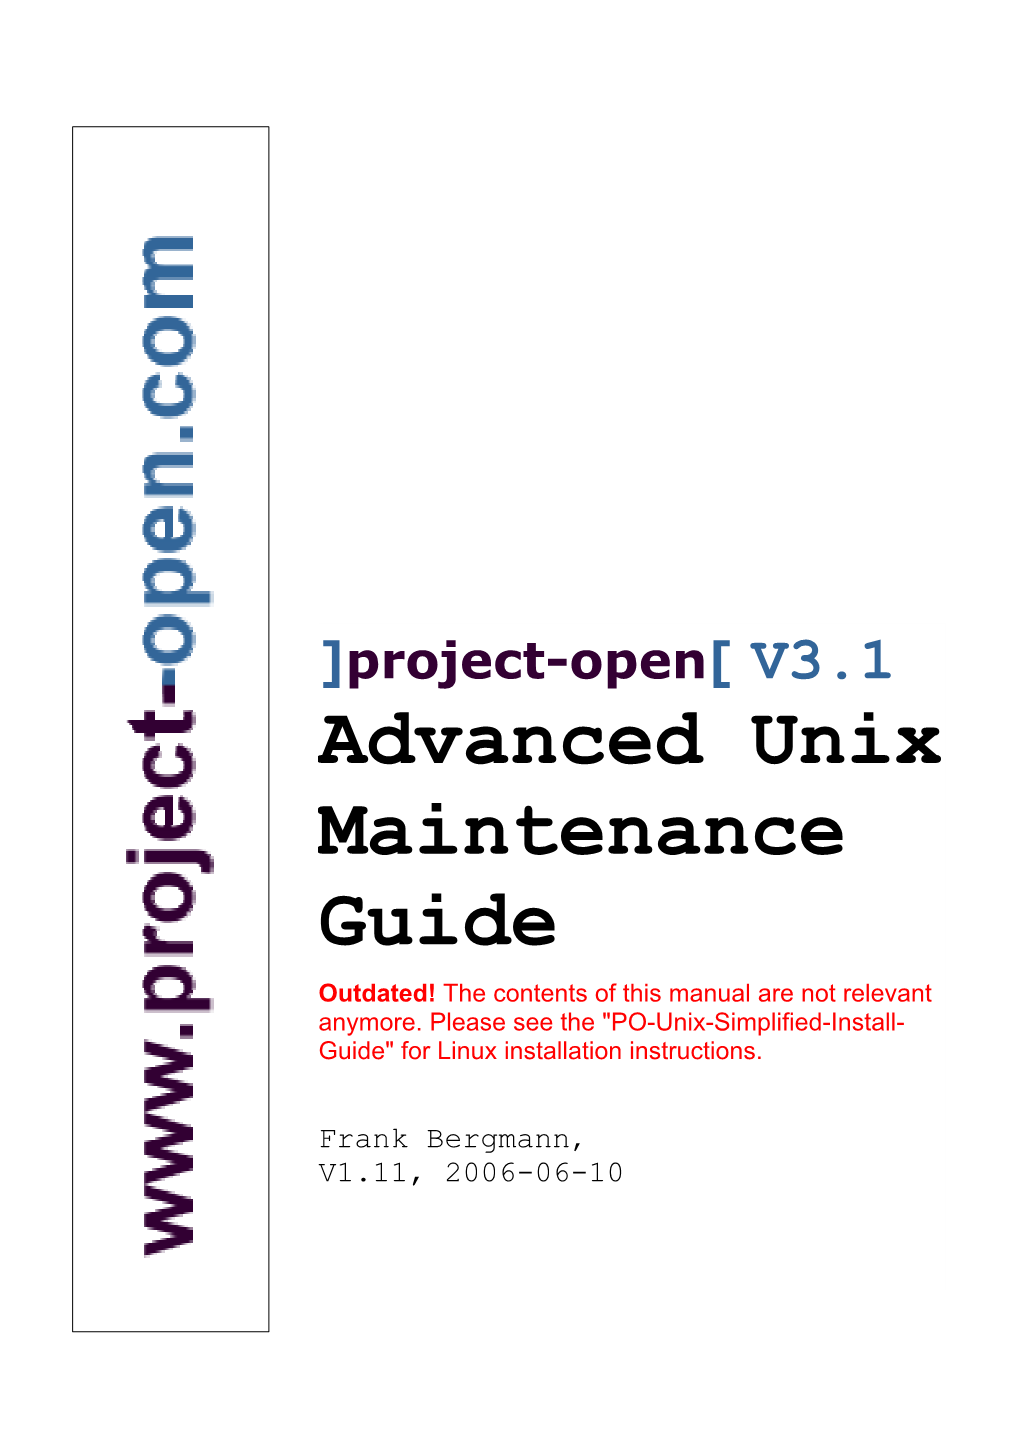 Advanced Unix Maintenance Guide Outdated! the Contents of This Manual Are Not Relevant Anymore